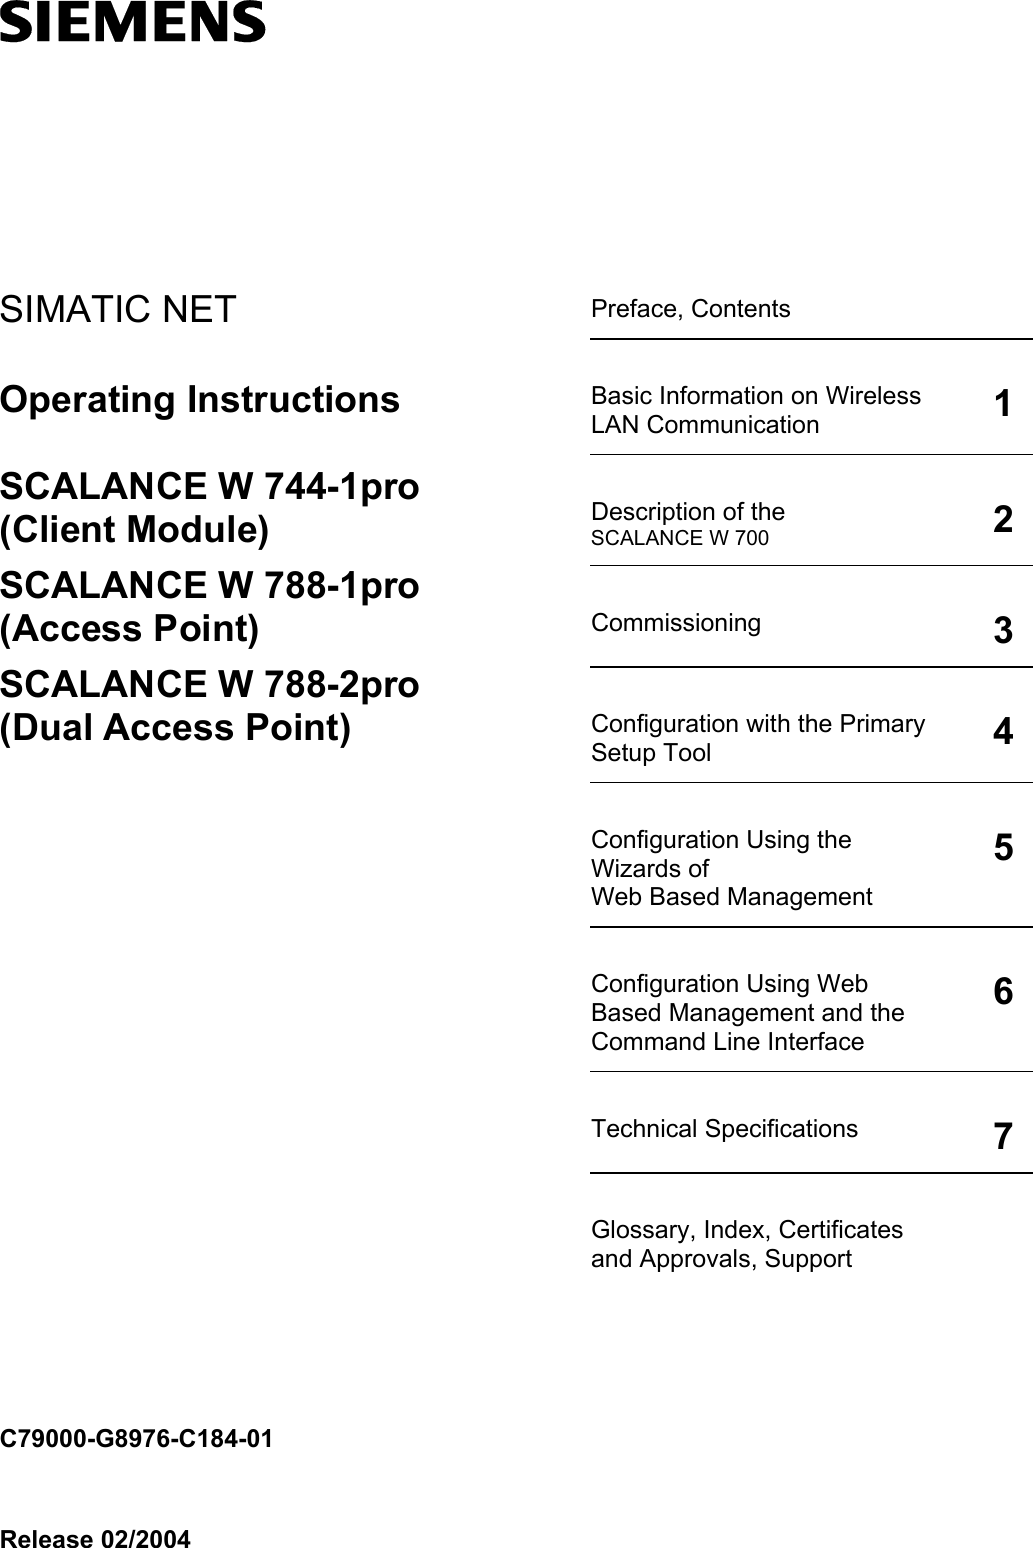    SIMATIC NET  Preface, Contents   Basic Information on Wireless LAN Communication 1Description of the SCALANCE W 700 2Commissioning 3Configuration with the Primary Setup Tool 4Configuration Using the Wizards of Web Based Management 5Configuration Using Web Based Management and the Command Line Interface 6Technical Specifications 7Glossary, Index, Certificates and Approvals, Support  Operating Instructions  SCALANCE W 744-1pro (Client Module) SCALANCE W 788-1pro (Access Point) SCALANCE W 788-2pro (Dual Access Point)                      C79000-G8976-C184-01 Release 02/2004 